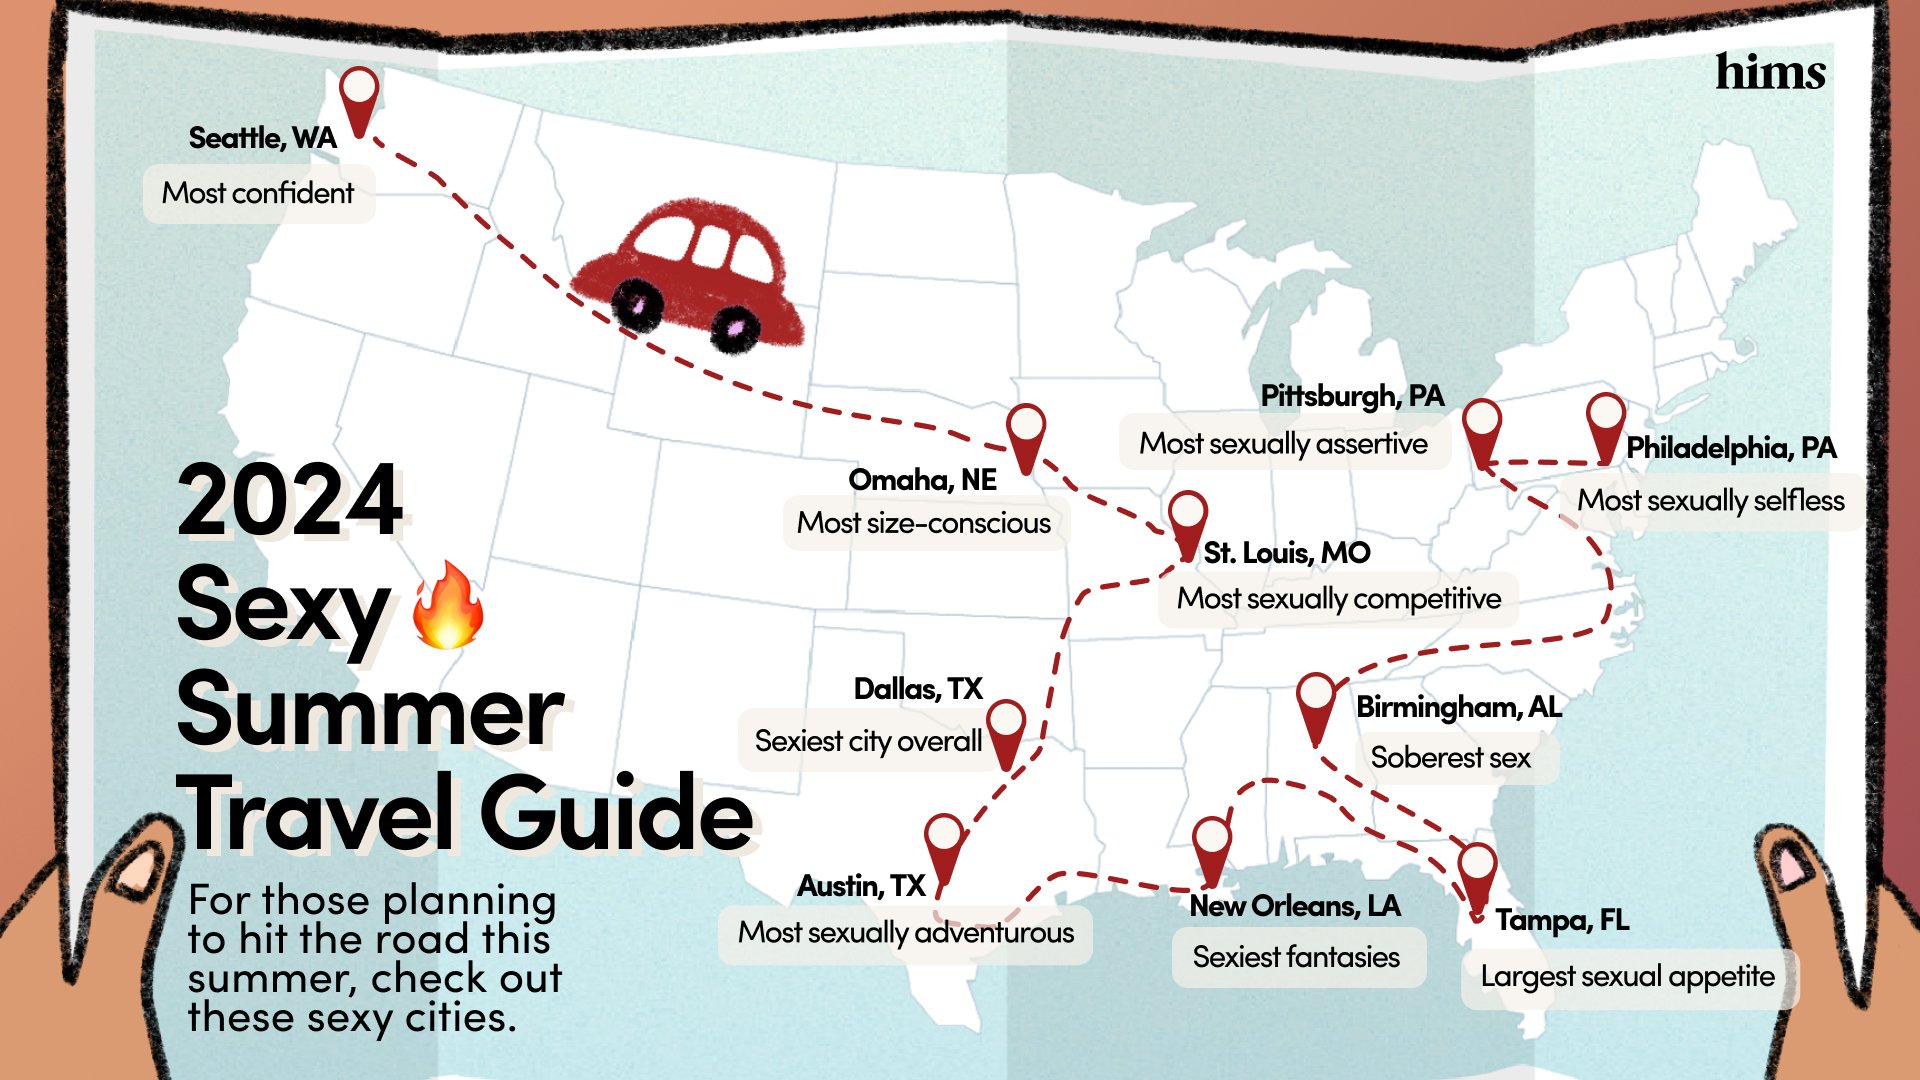 Illustrative map of 2024 Sexy Summer Travel Guide.